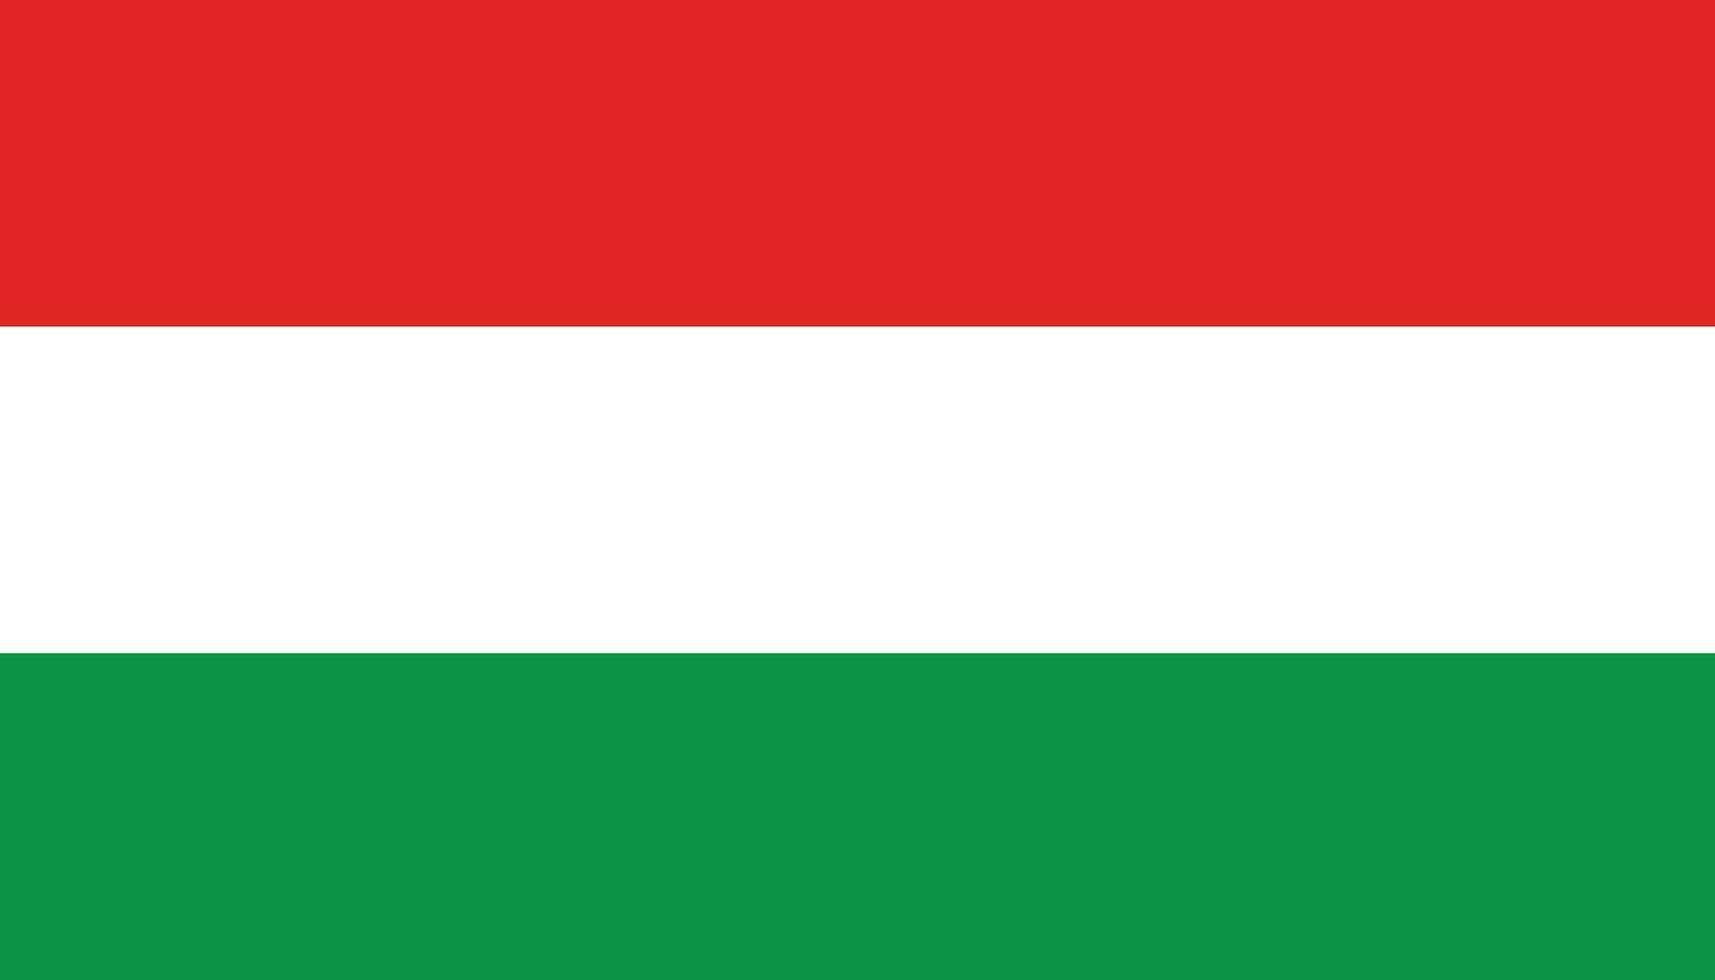 Hungary flag icon in flat style. National sign vector illustration. Politic business concept.